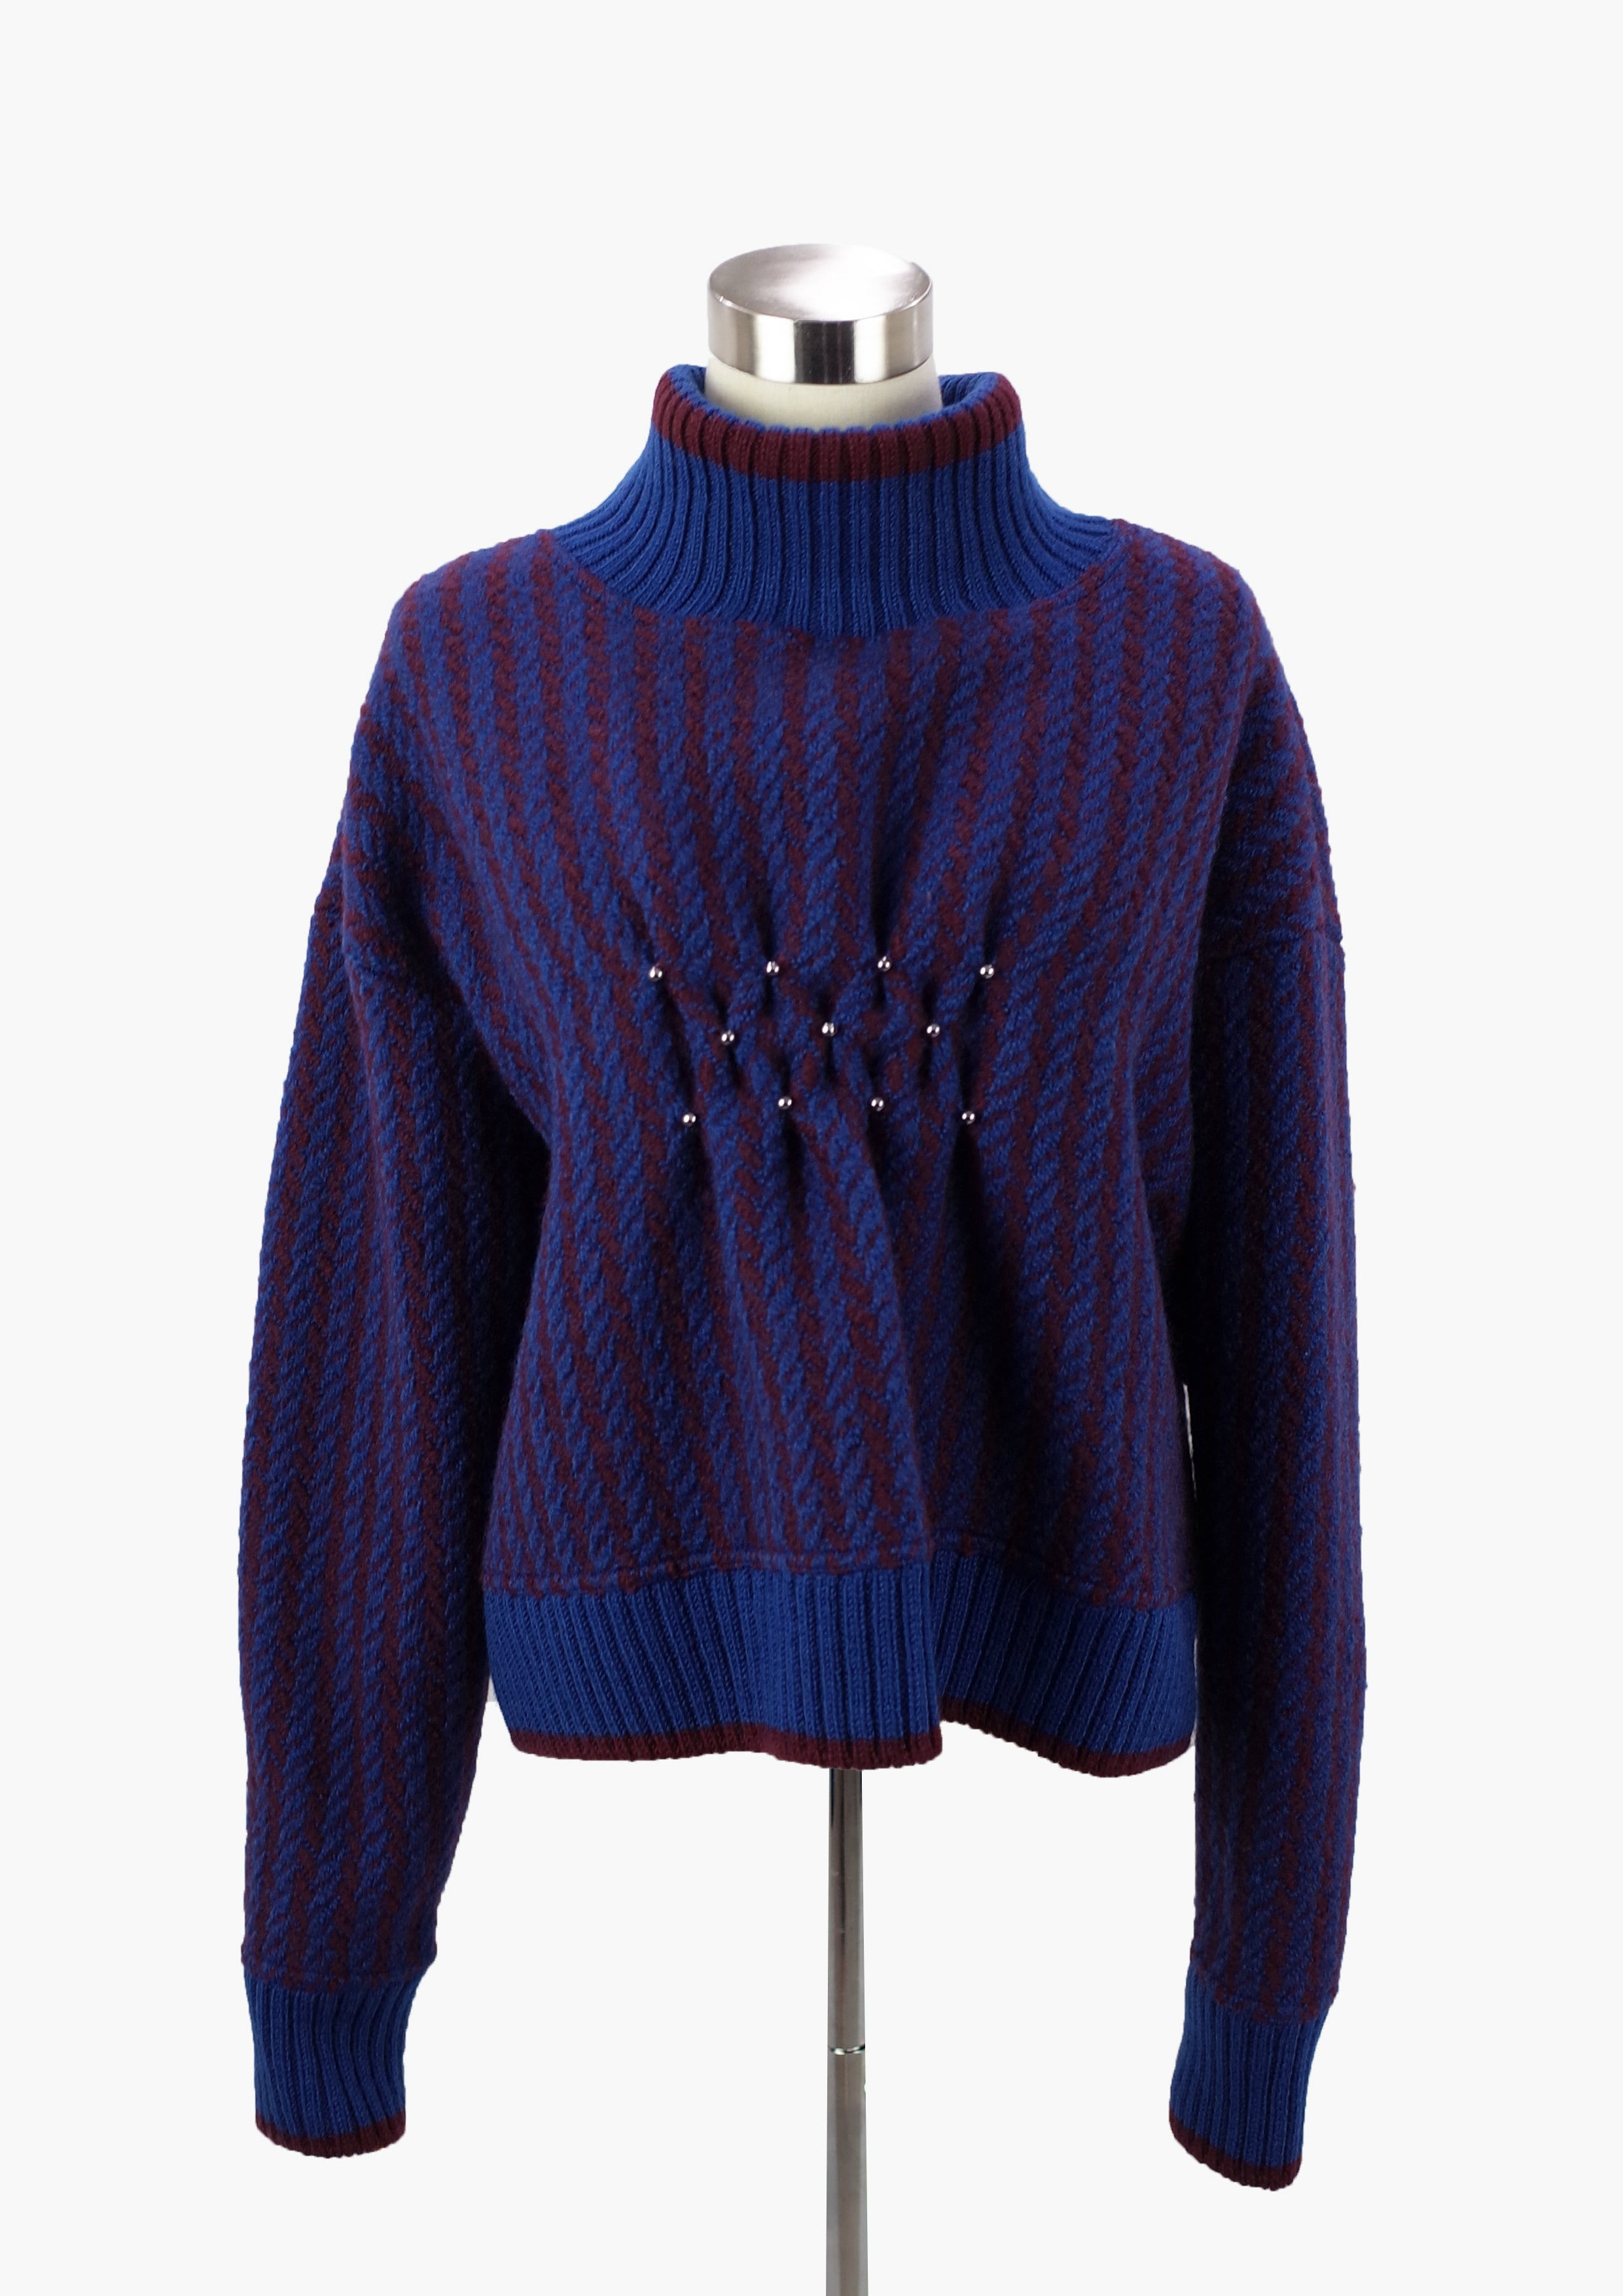 Frottage refine knit pullover